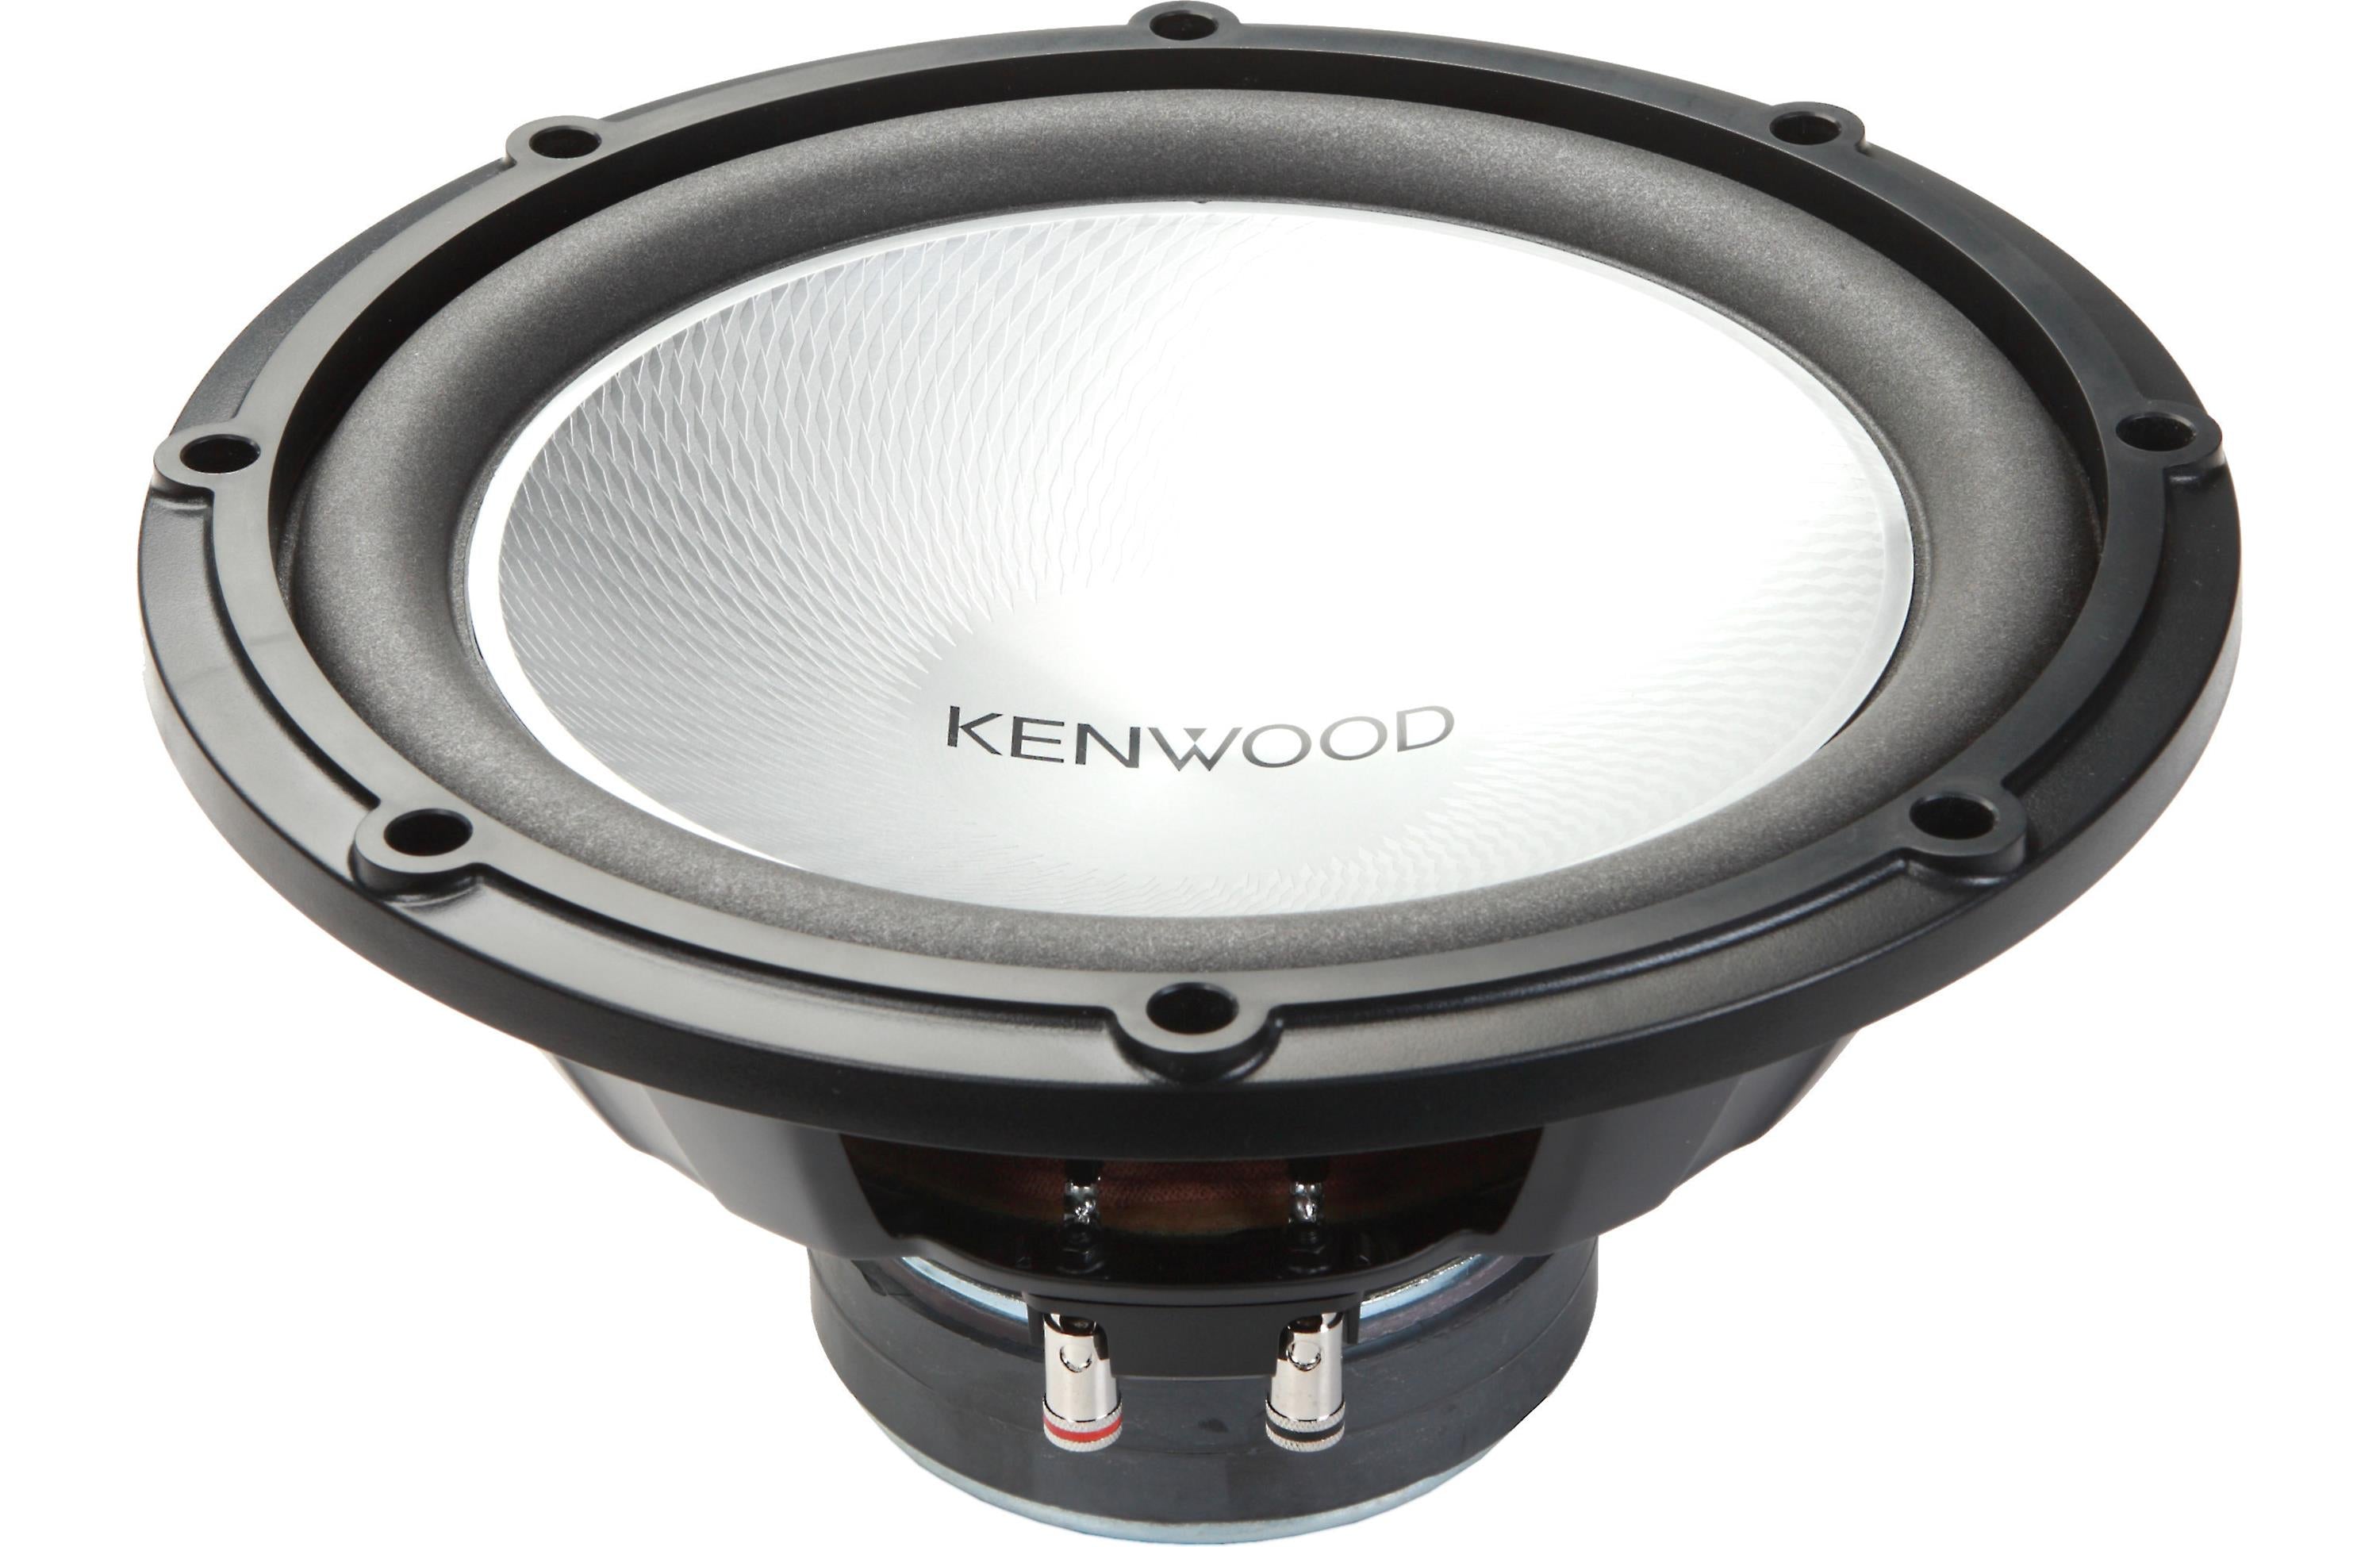 Kenwood KFC-W12DVC Series Voice Coil 12" Subwoofer (E Safe and Sound HQ